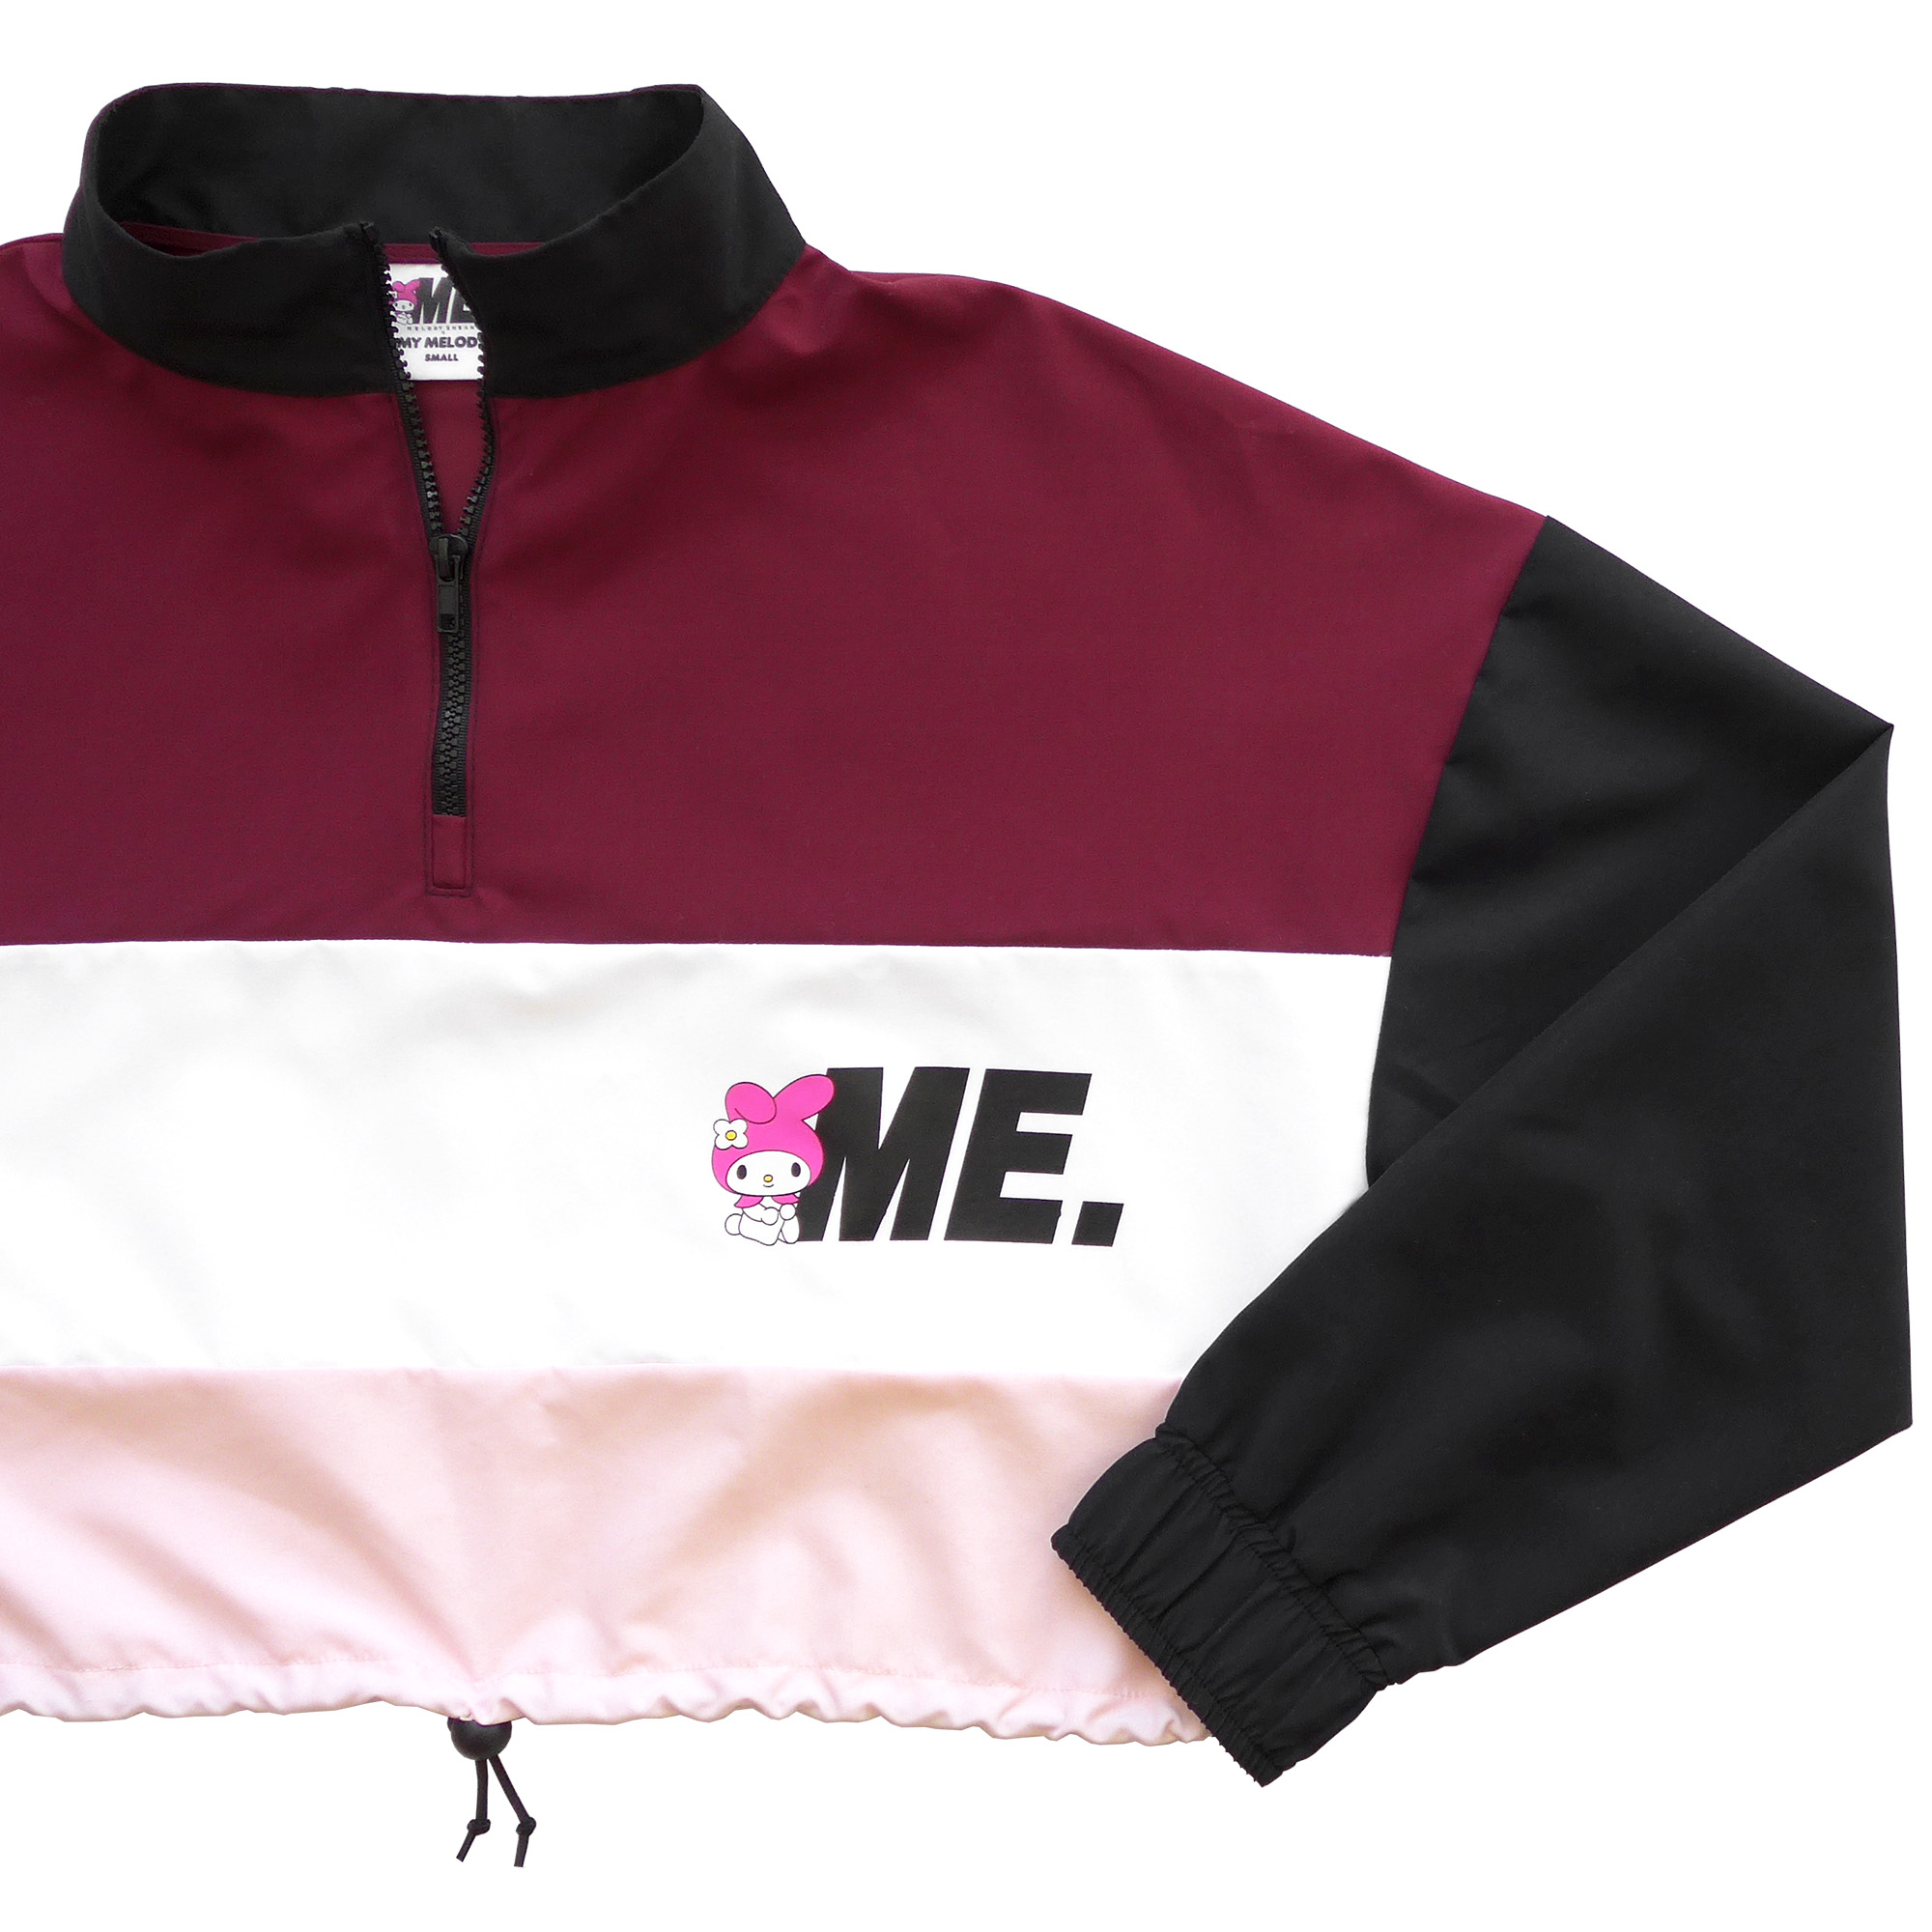 Melody Ehsani x My Melody   Windbreaker - multi color burgundy zoomed front.jpg